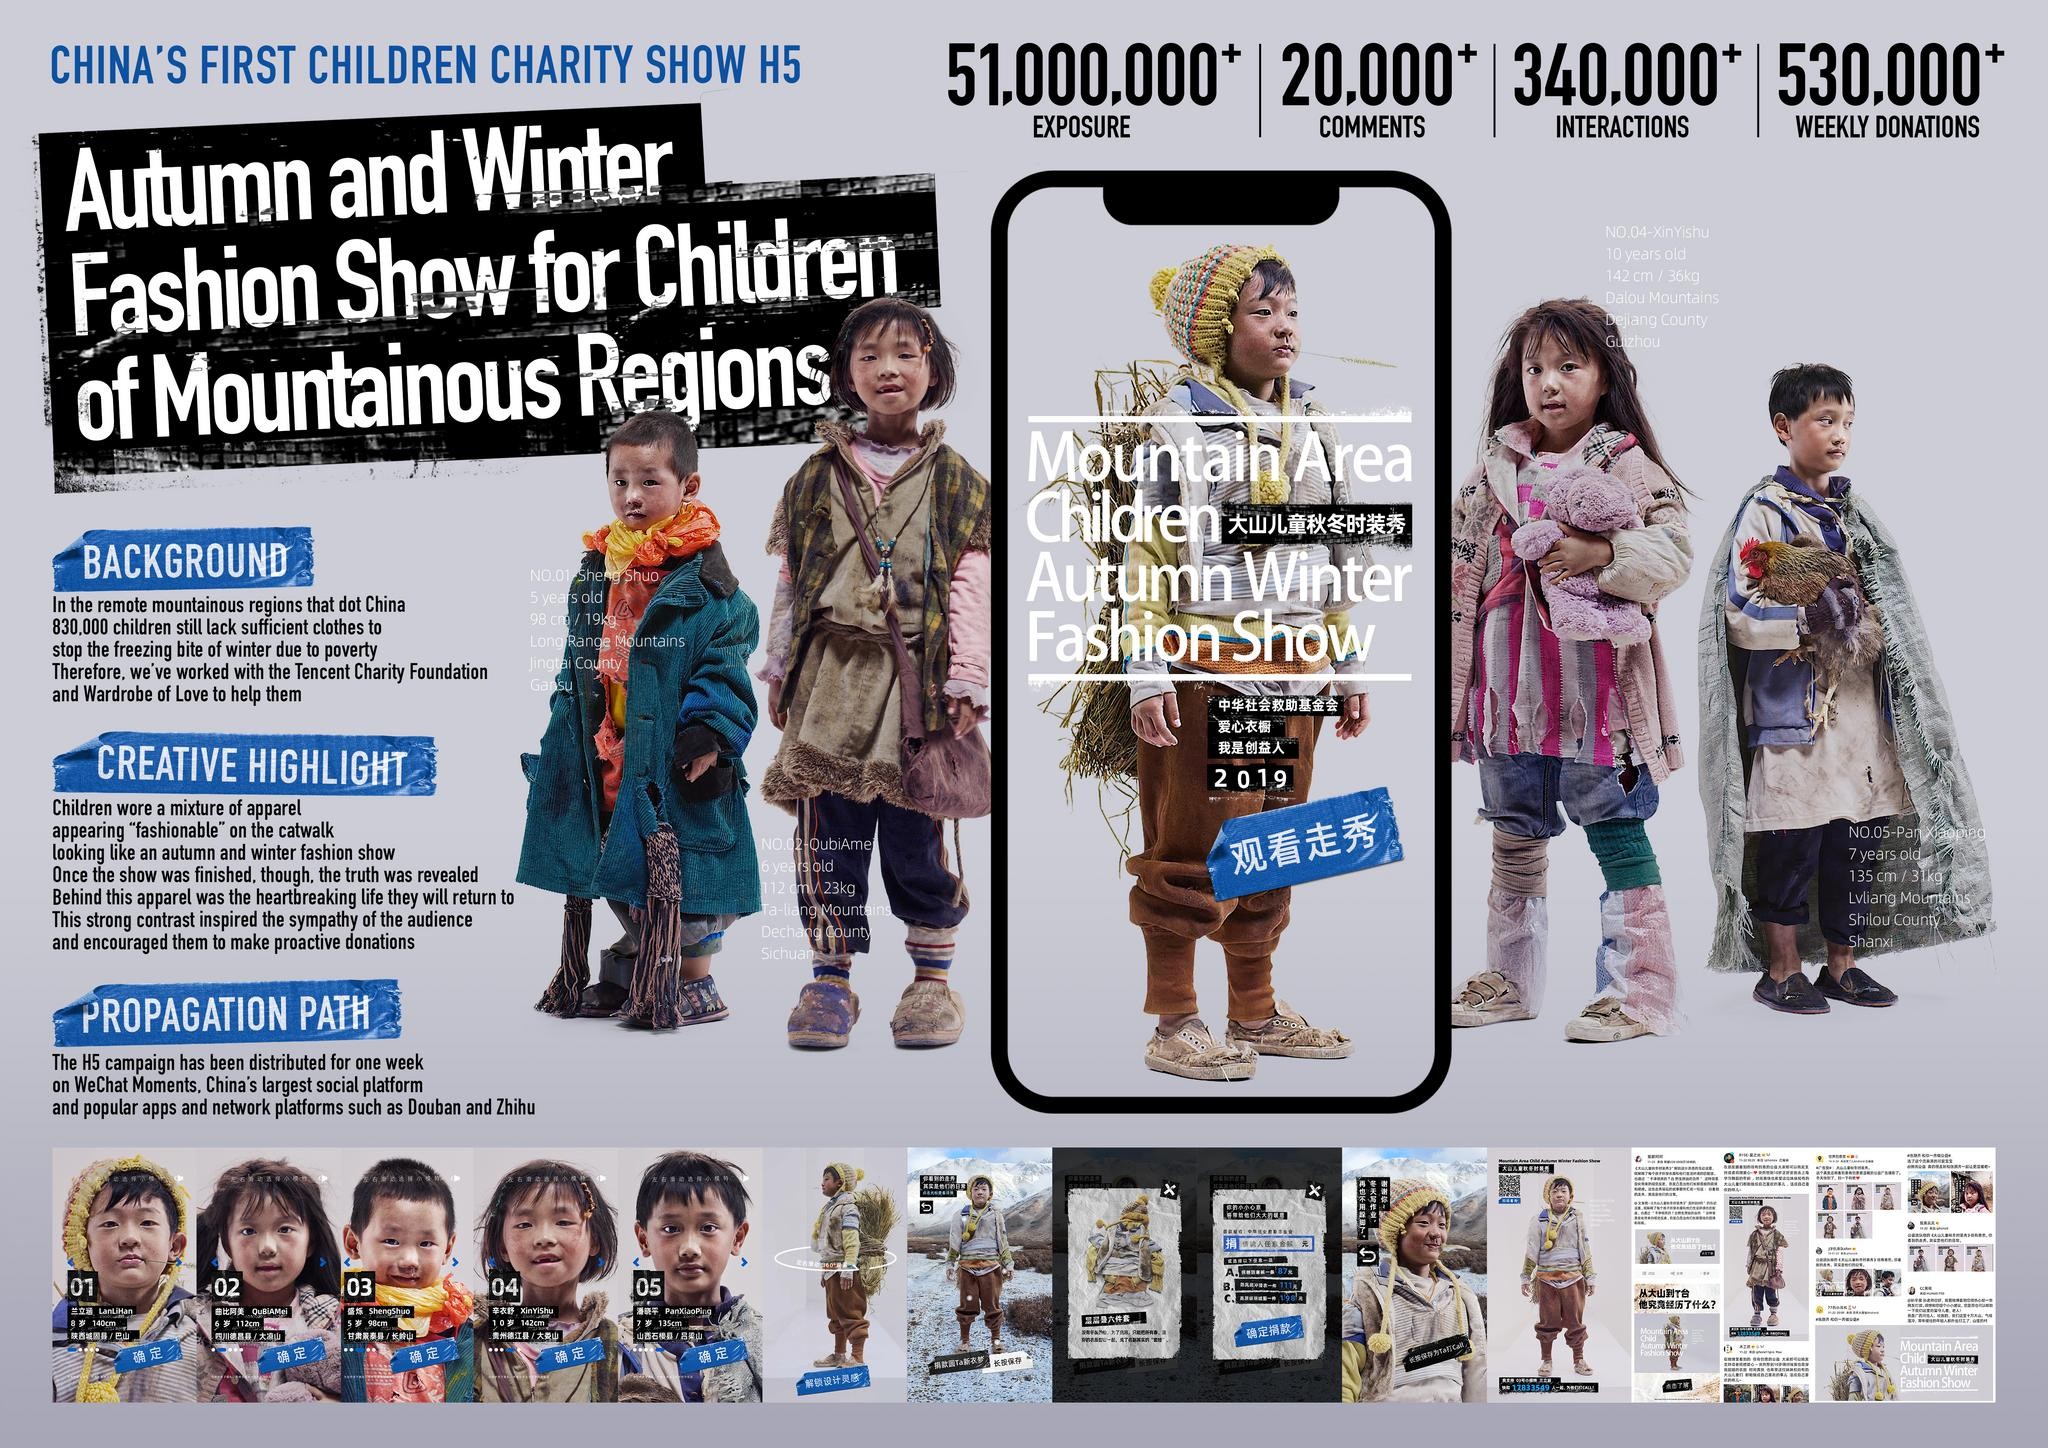 Autumn and Winter Fashion Show for Children of Mountainous Regions